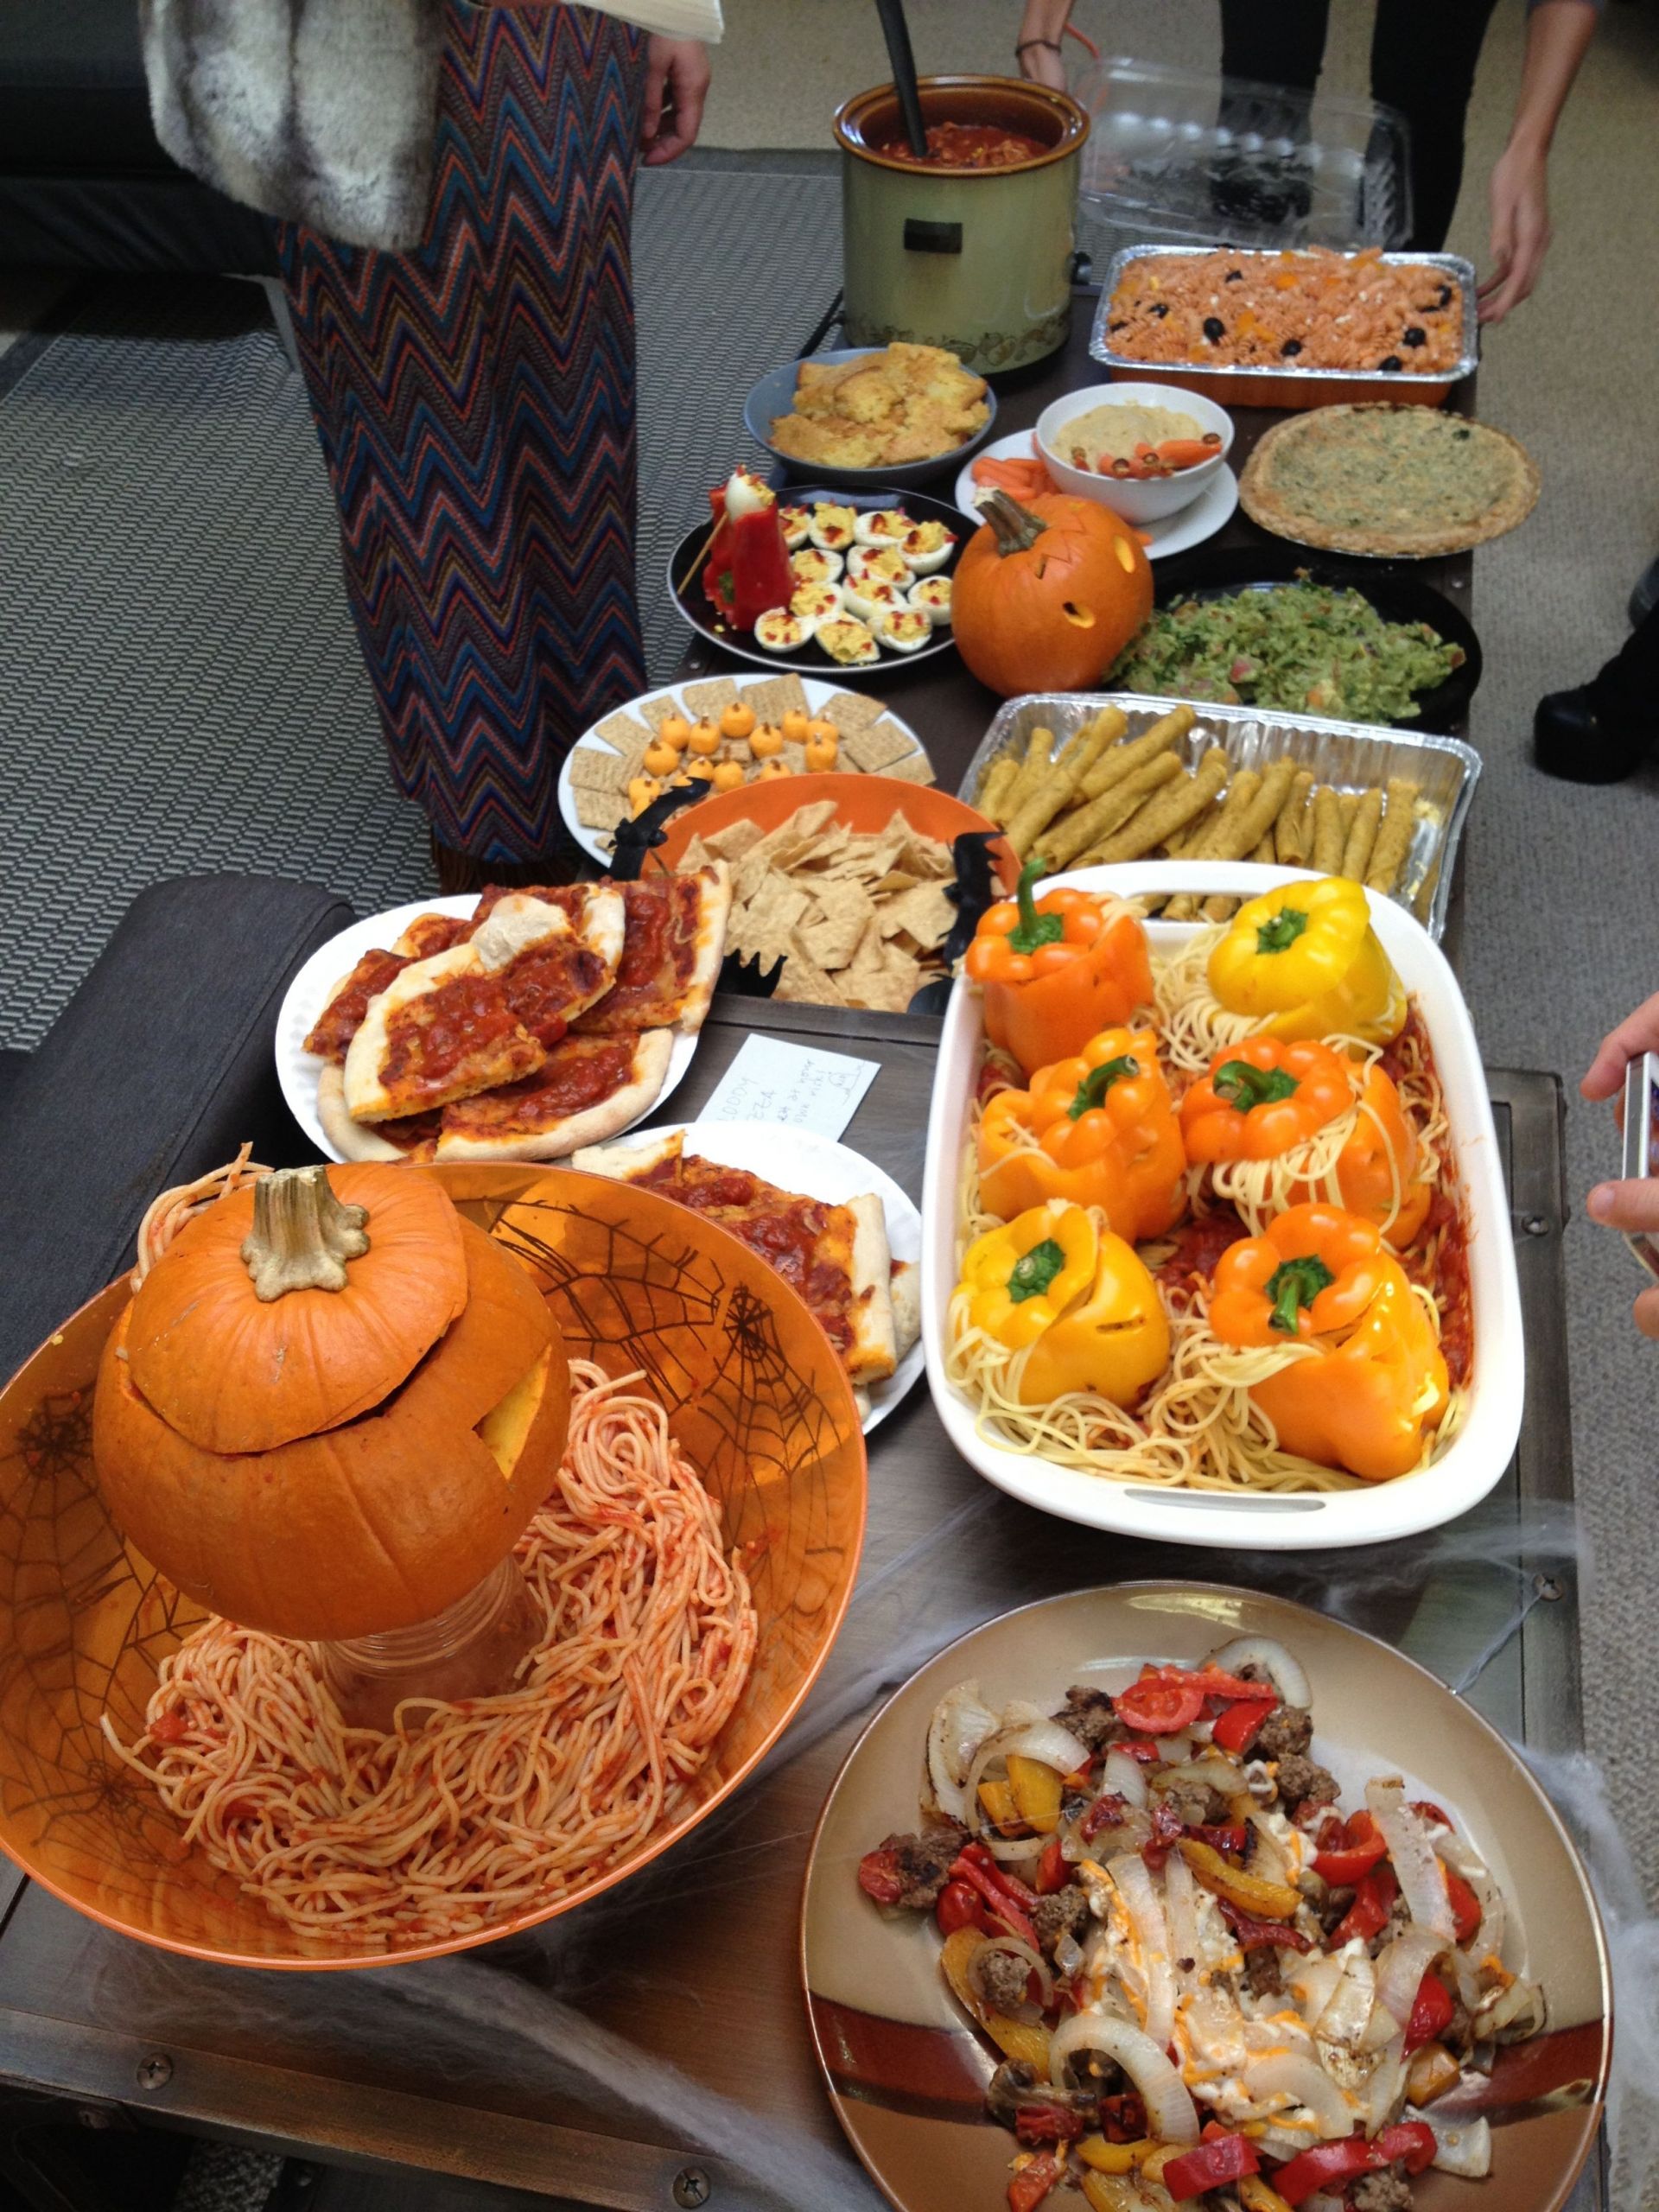 Food Ideas For Office Party
 Halloween themed office potluck